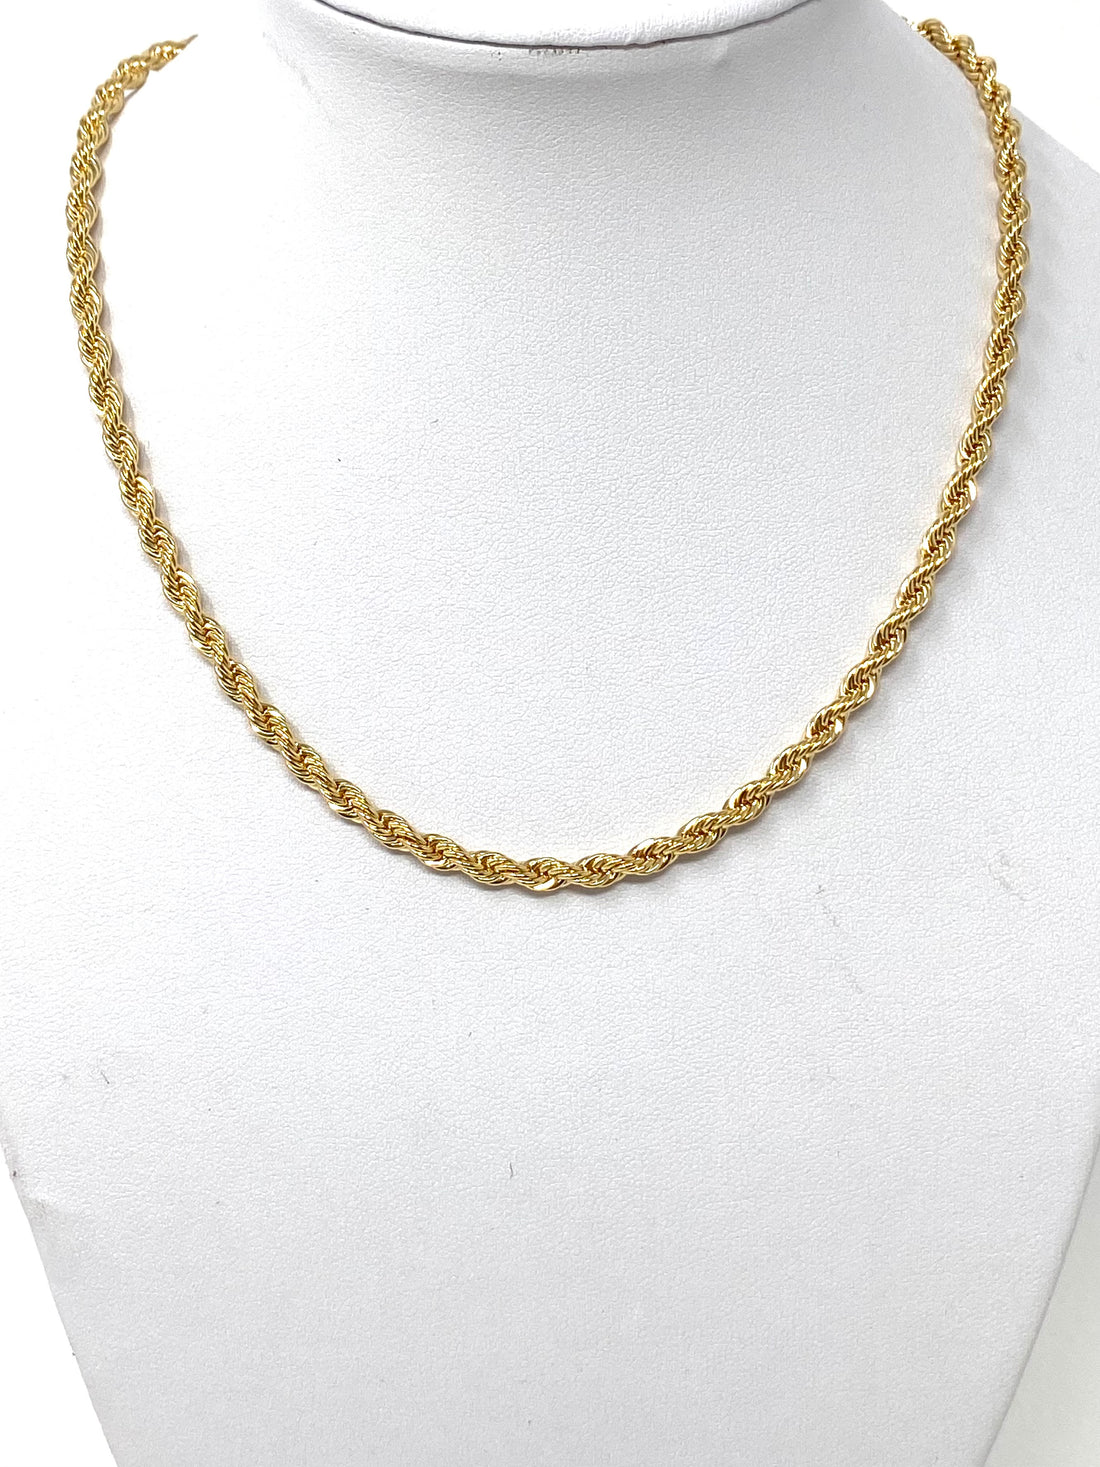 Miles 16" Chunky Rope Chain Necklace in 14k Gold